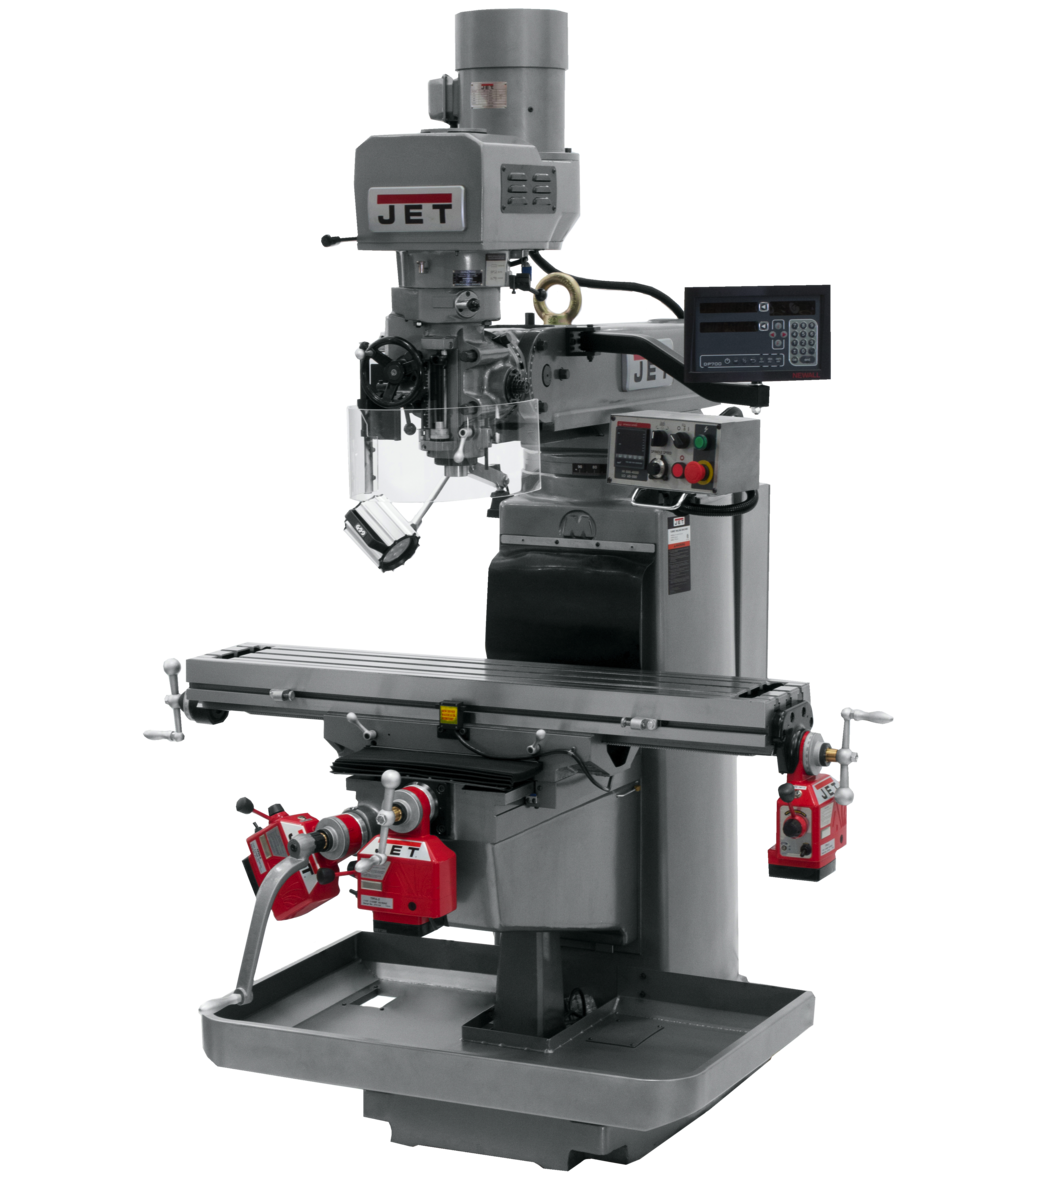 JTM-1050EVS2/230 Mill With 3-Axis Newall DP700 DRO (Knee) With X, Y and Z-Axis Powerfeeds